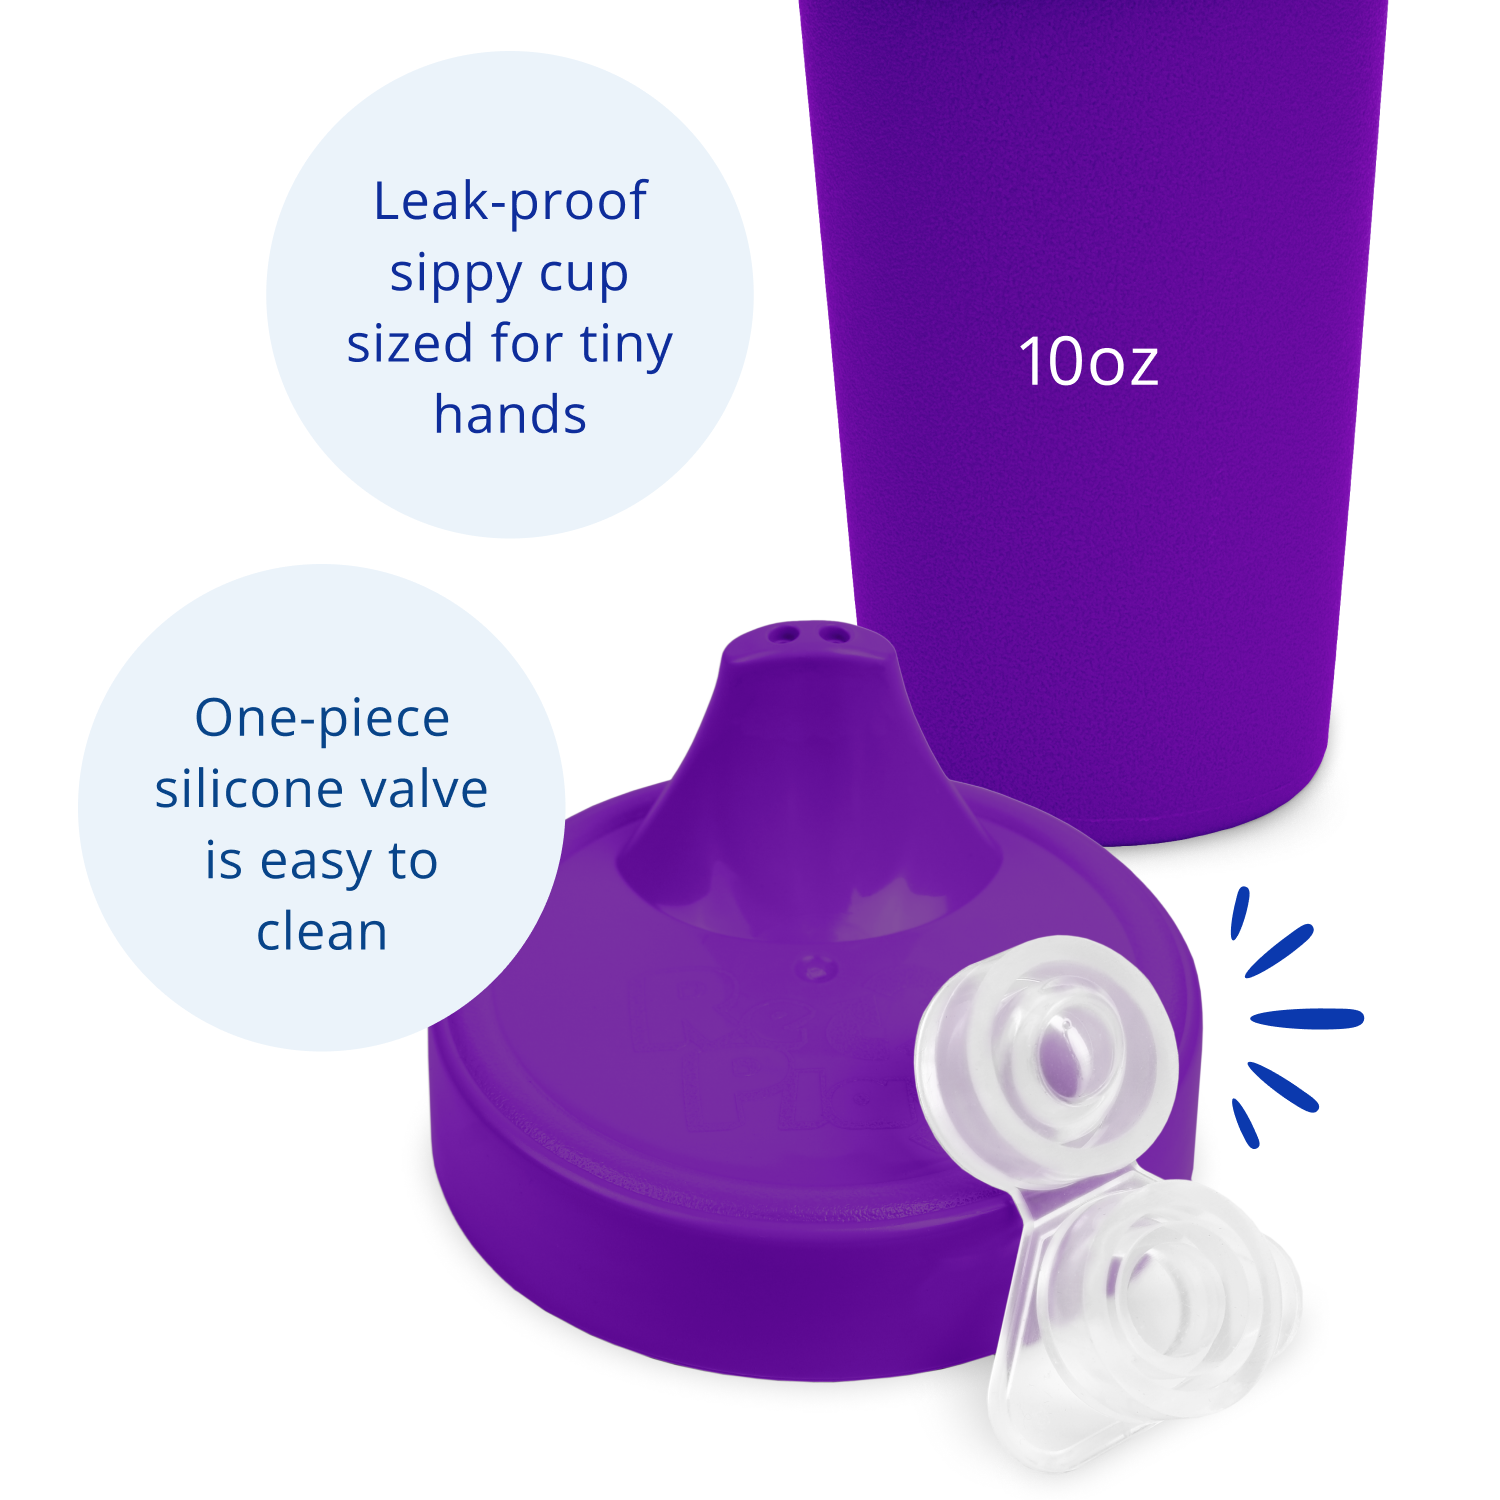 Re-Play Made in The USA 3pk No Spill Sippy Cups for Baby, Toddler, and Child Feeding - Bright Pink, Purple, Aqua (Sparkle)